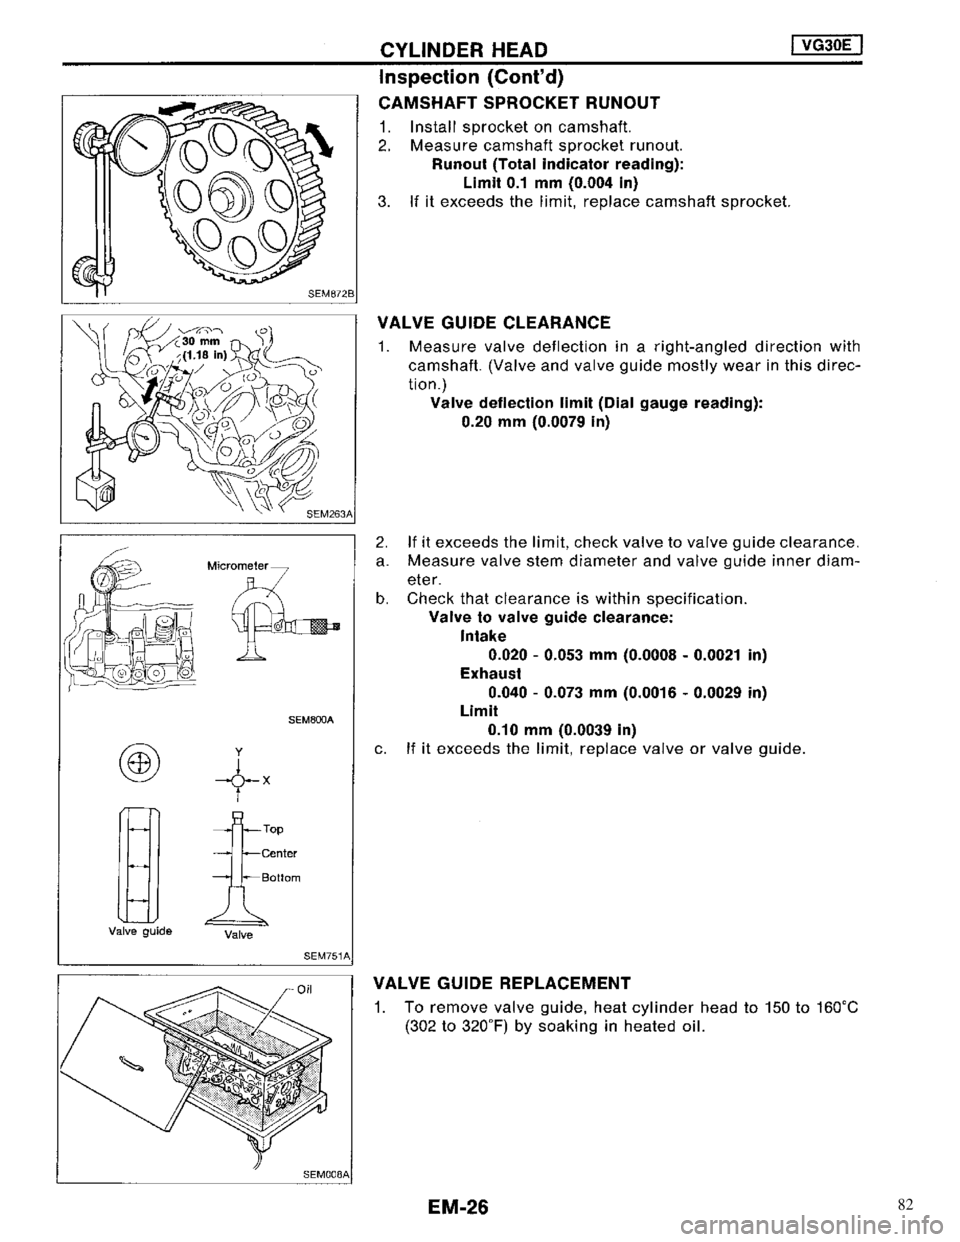 NISSAN MAXIMA 1994 A32 / 4.G Engine Mechanical Owners Manual 82 